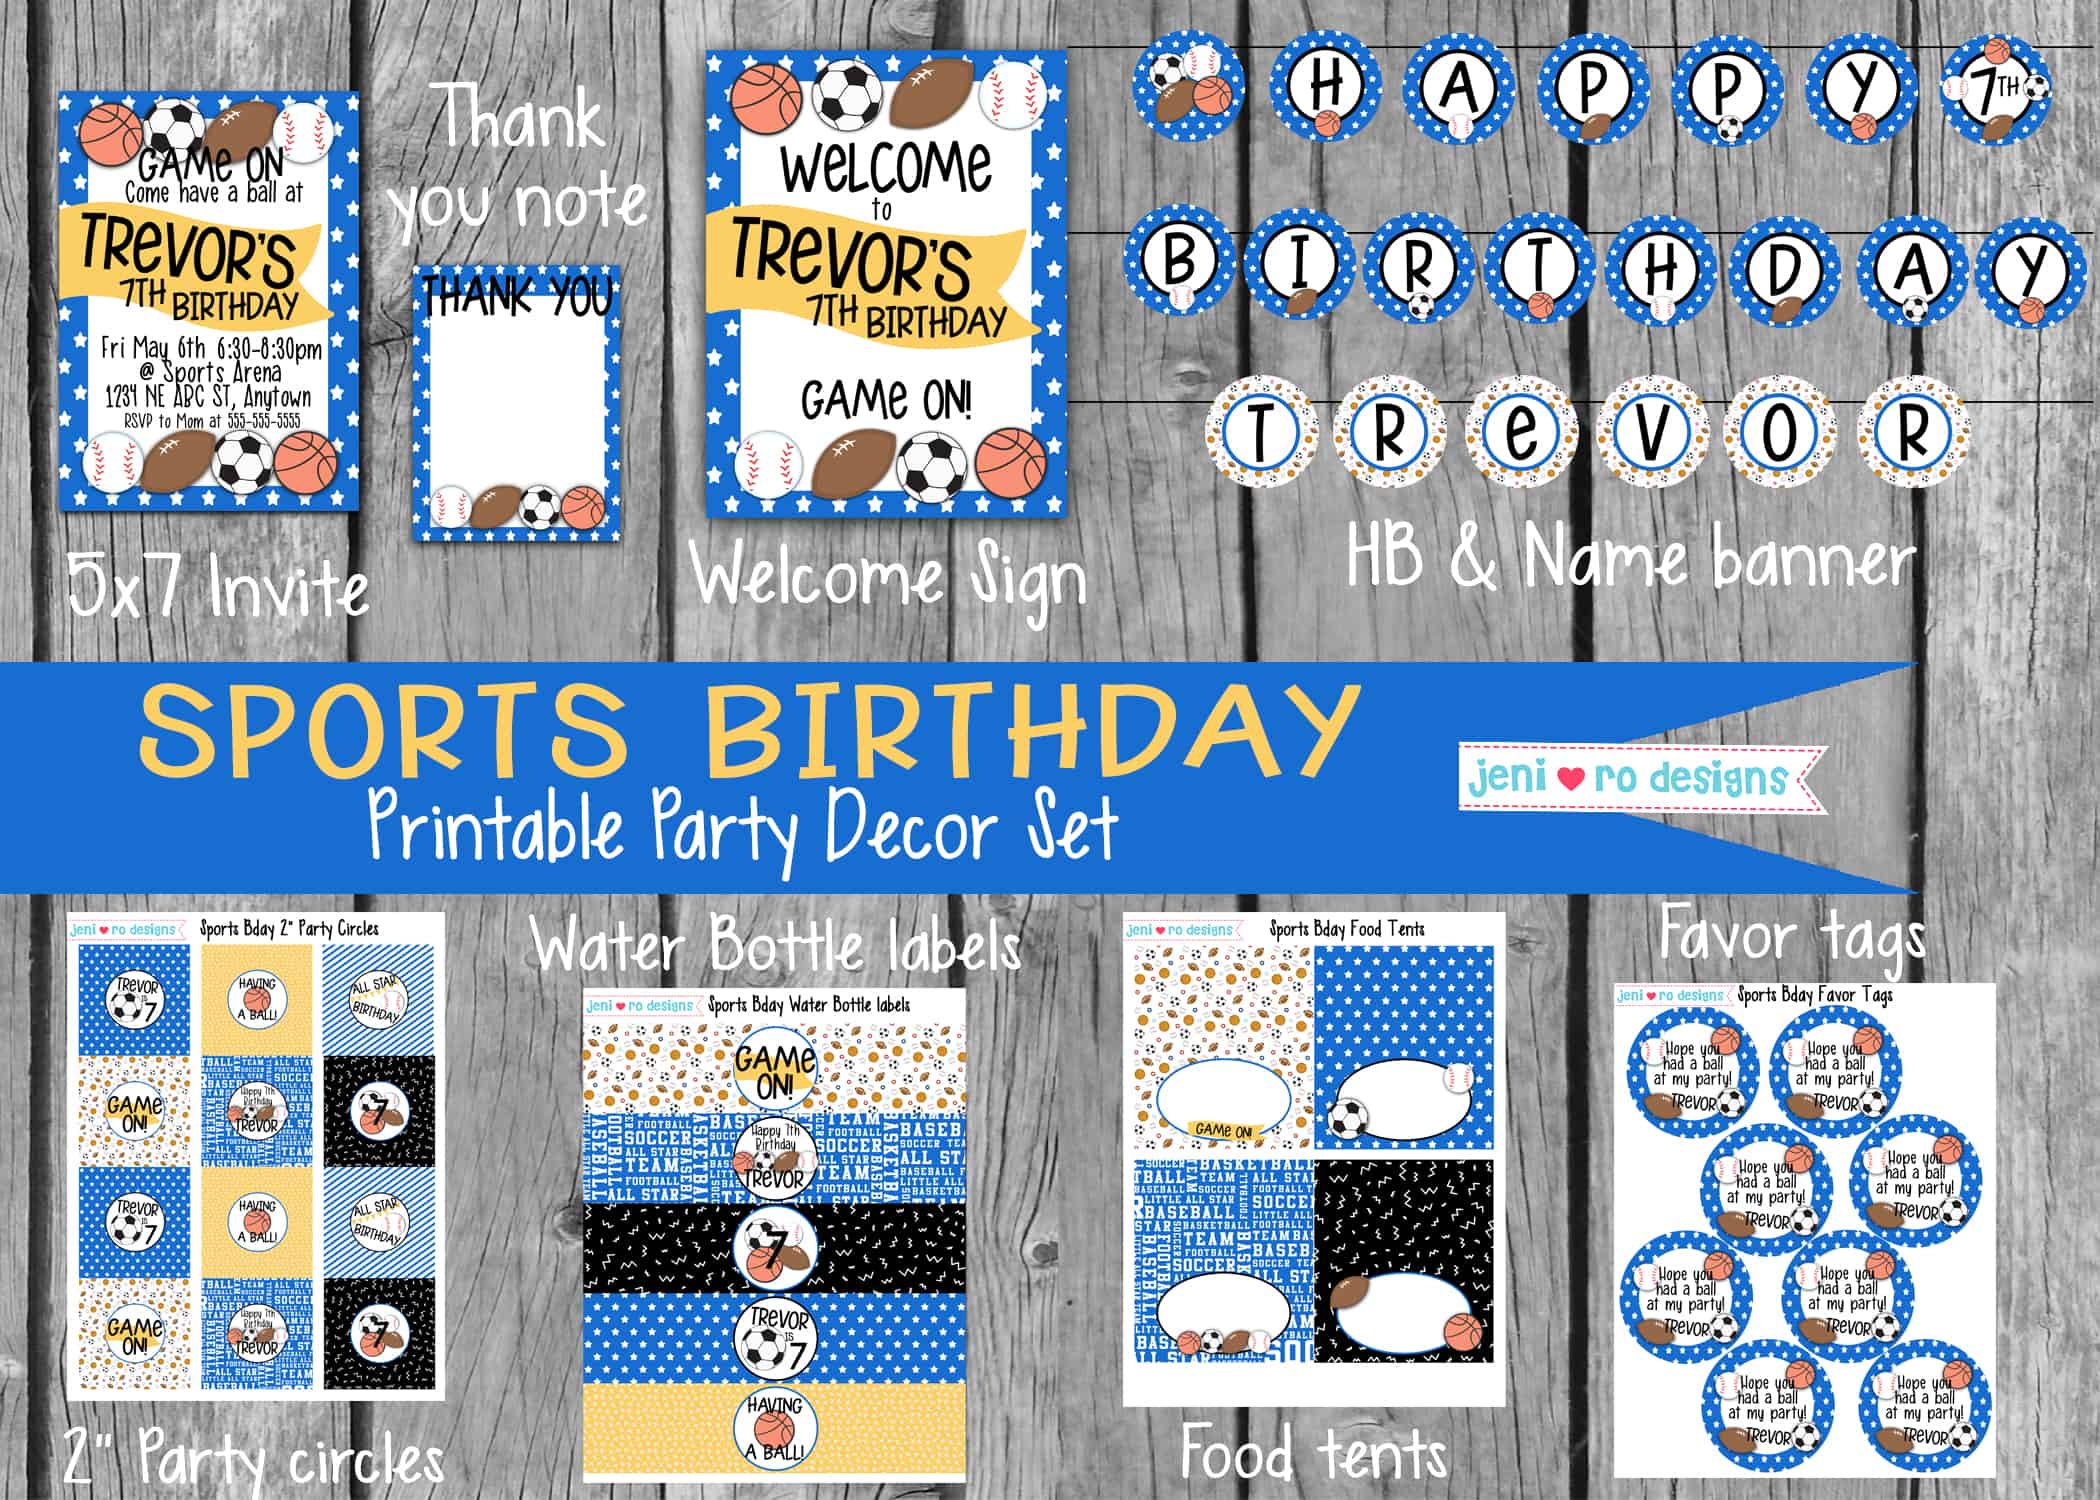 Hb designs, themes, templates and downloadable graphic elements on